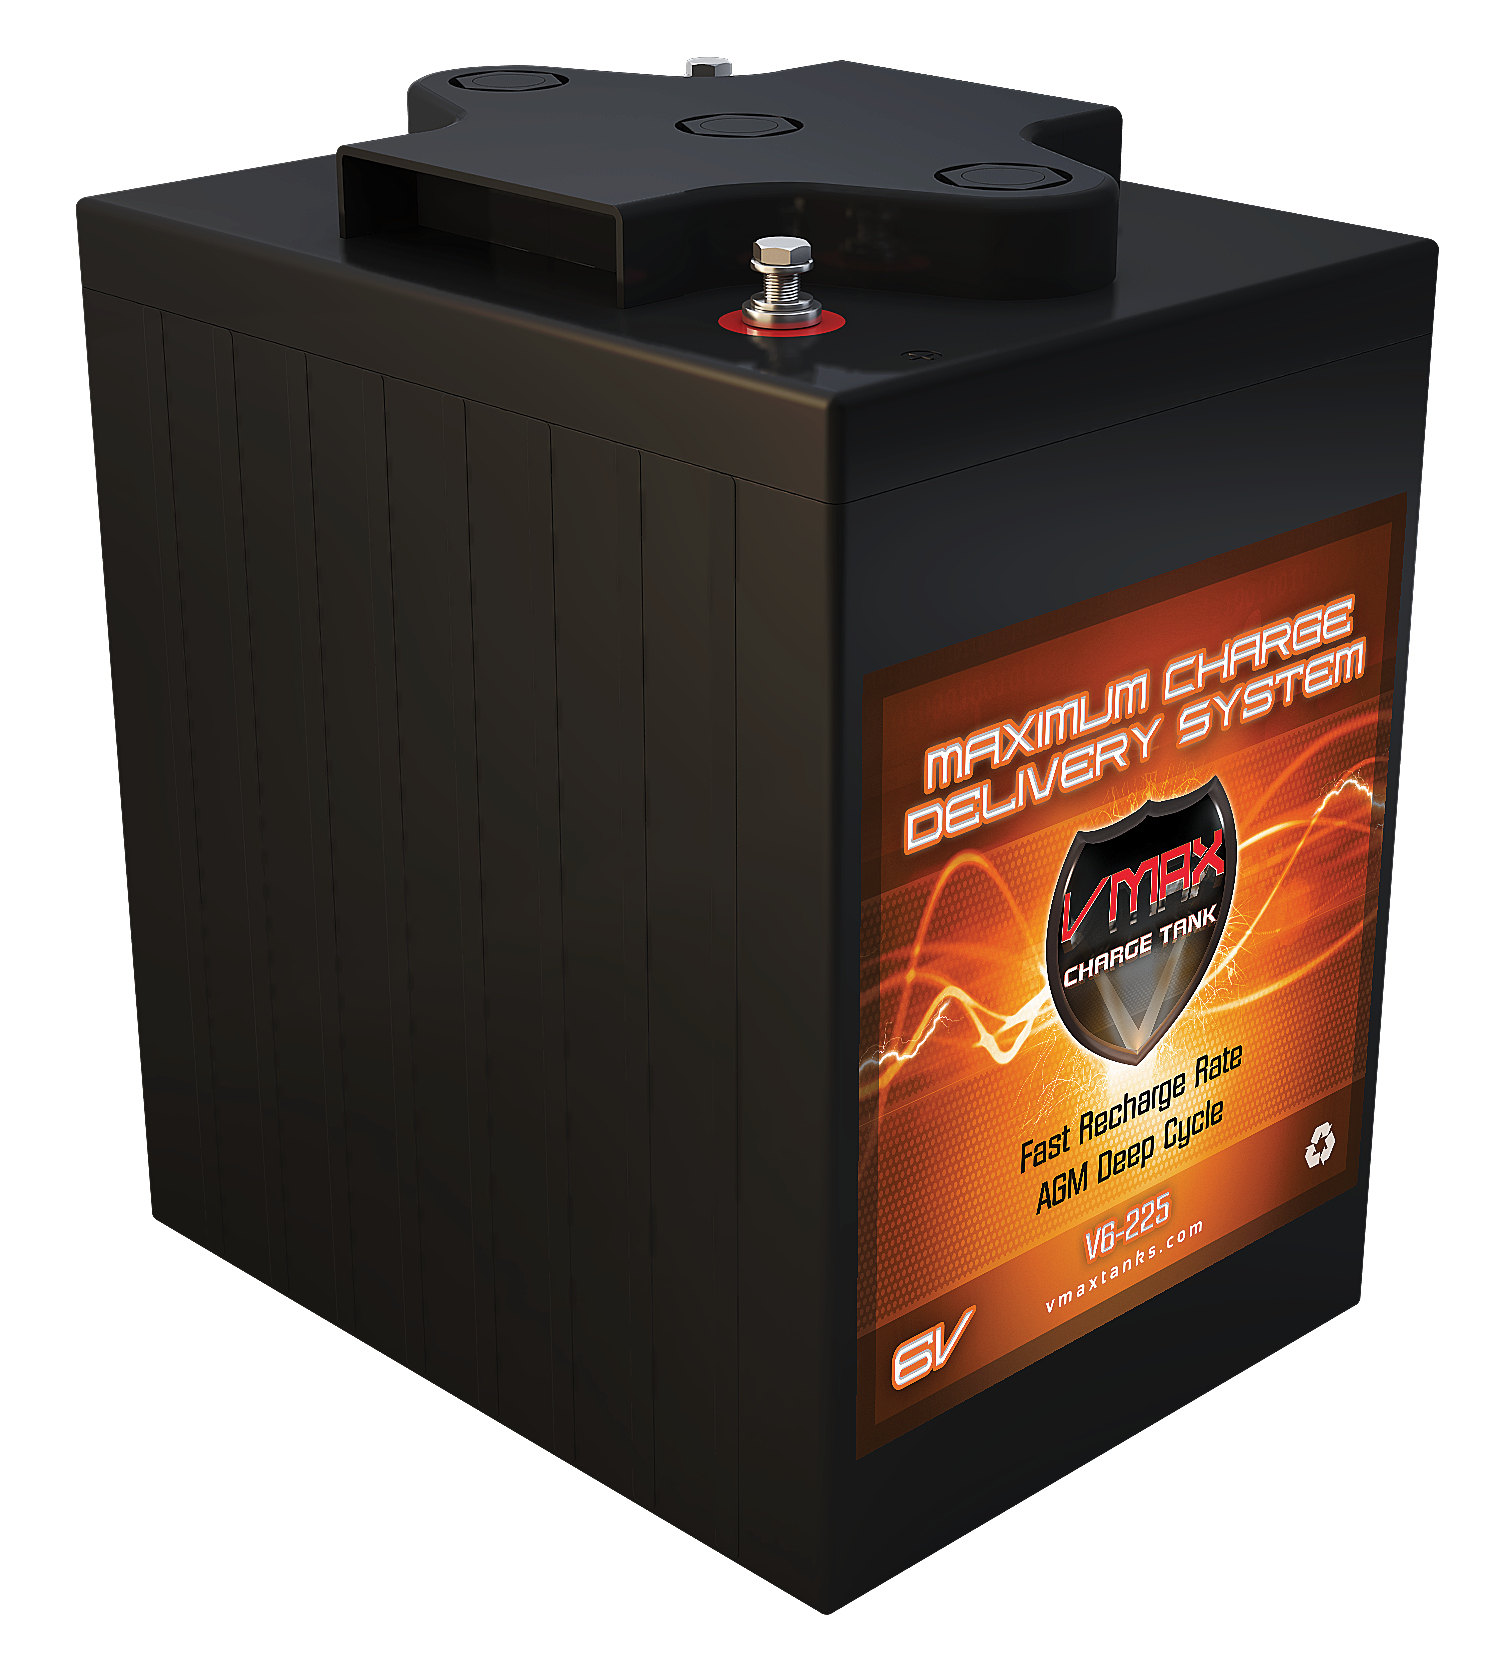 VMAXTANKS 6 Volt 225Ah AGM Battery: High Capacity & Maintenance Free Deep Cycle Battery for Golf Carts, Solar Energy, Wind Energy. - image 1 of 1